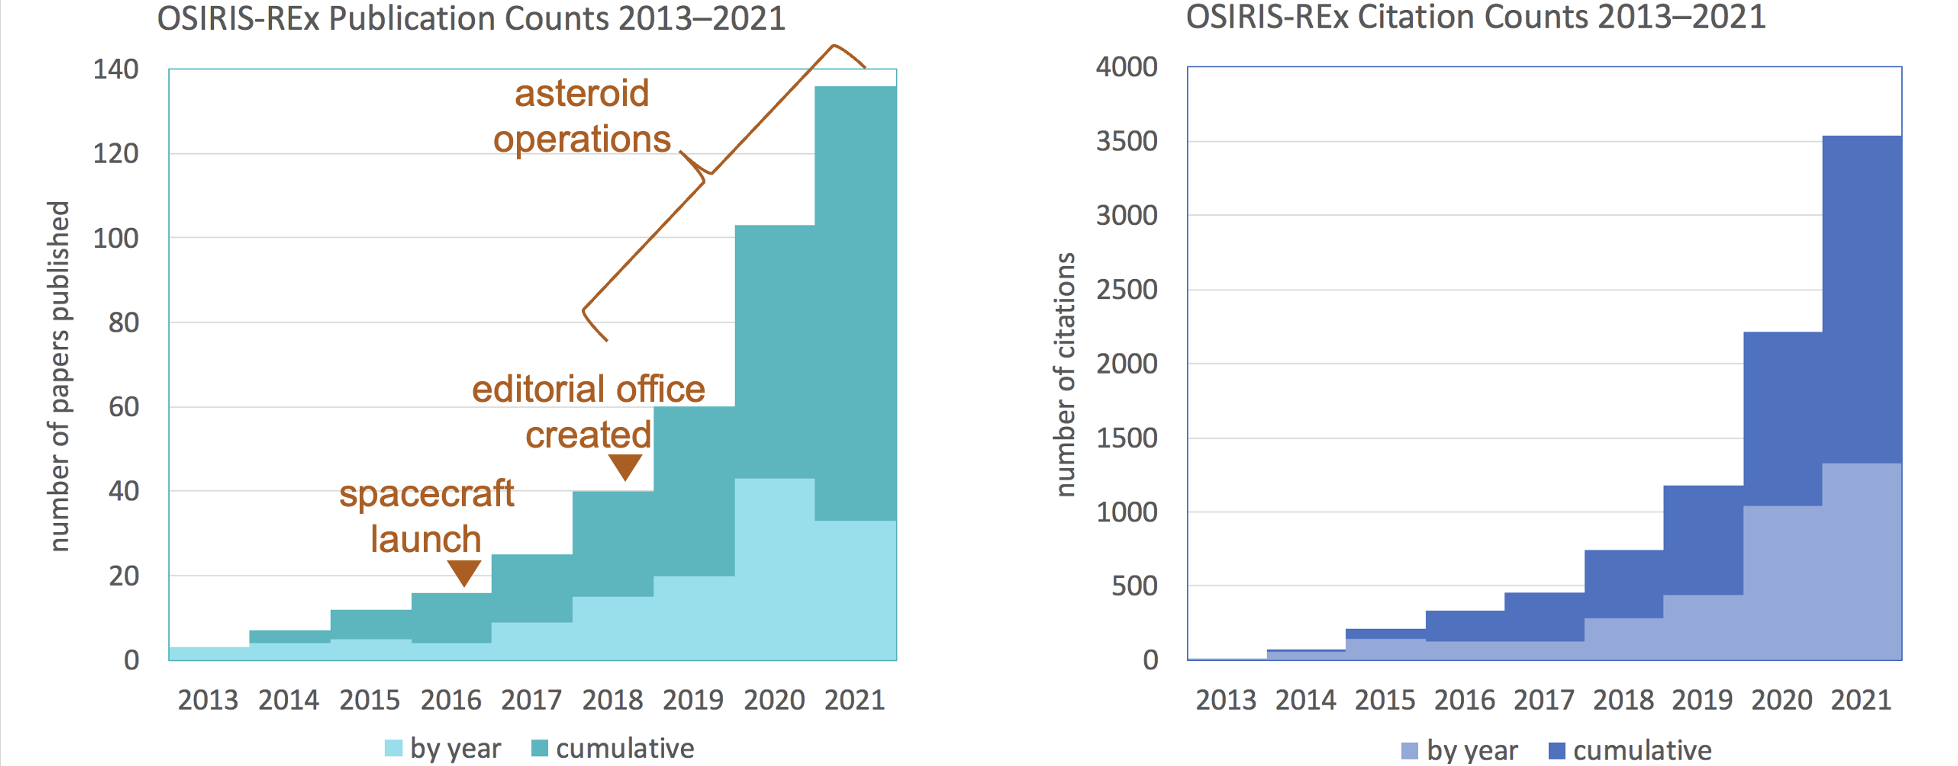 <b>Figure 3.</b> Publication counts (left) and citation counts (right) for OSIRIS-REx manuscripts between 2013 and 2021. Data from Web of Science.